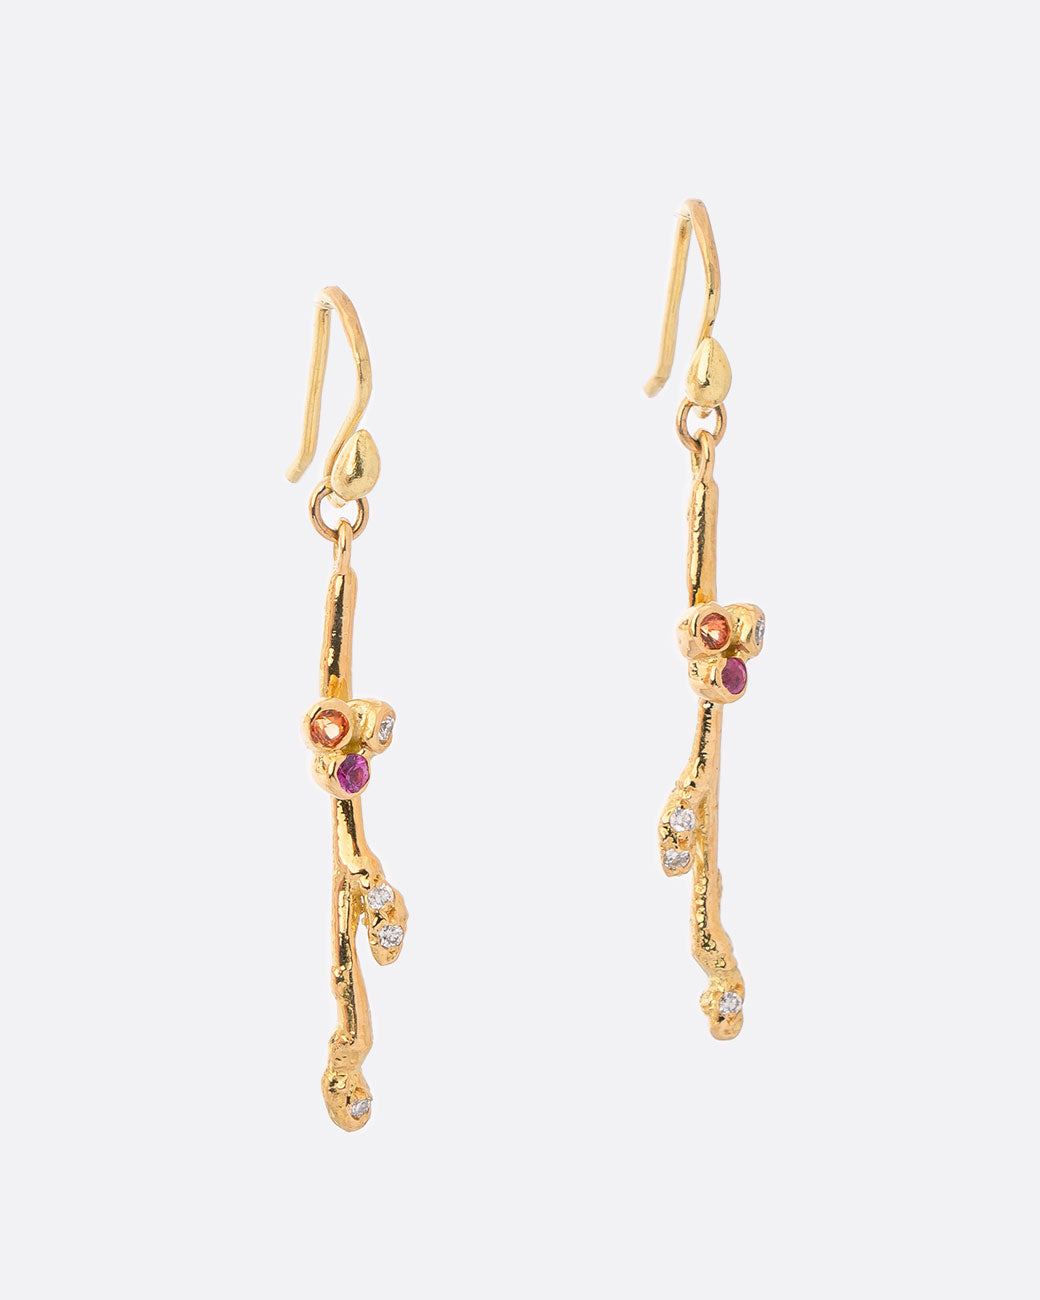 18k yellow gold brand earrings with pink sapphires, orange sapphires, and diamonds by Kimberlin Brown, shown from the side.